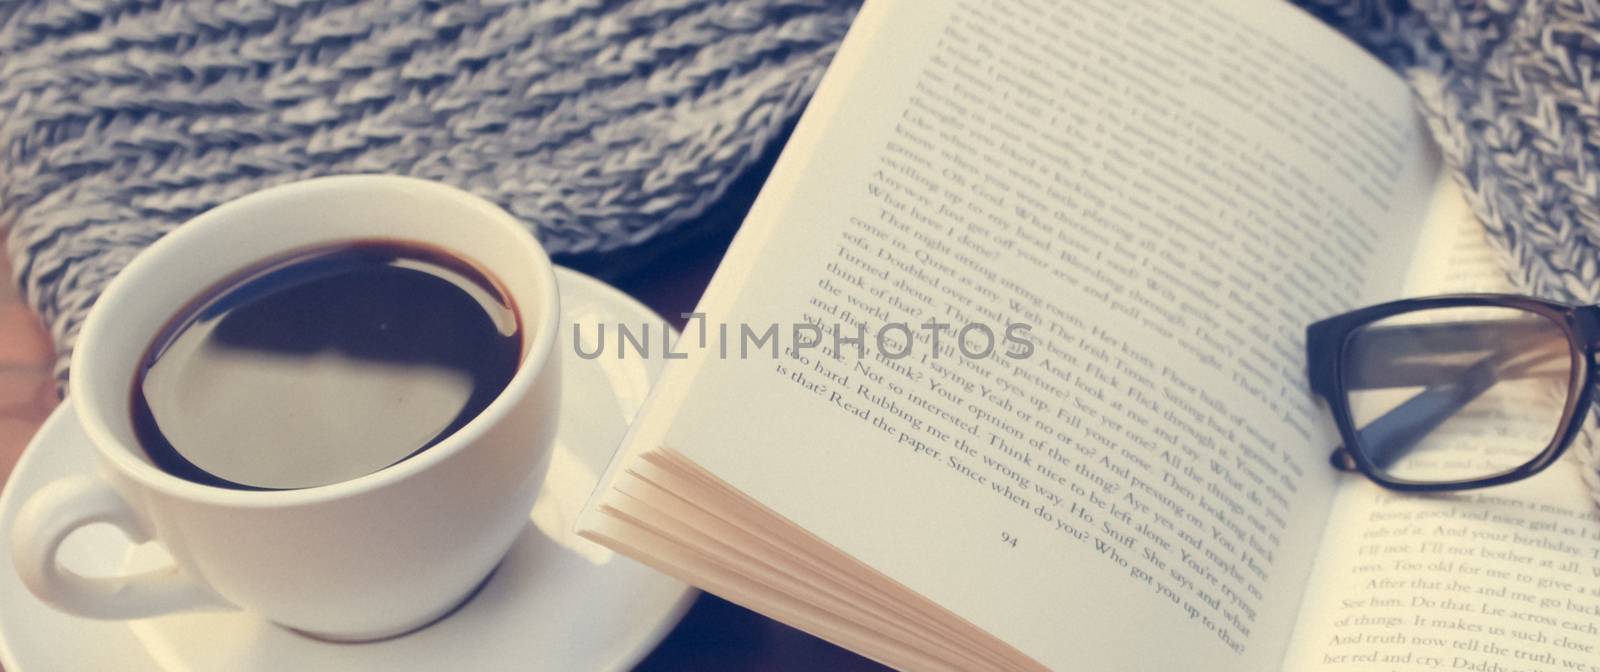 Coffe book scarf and glassess on the table, have a break